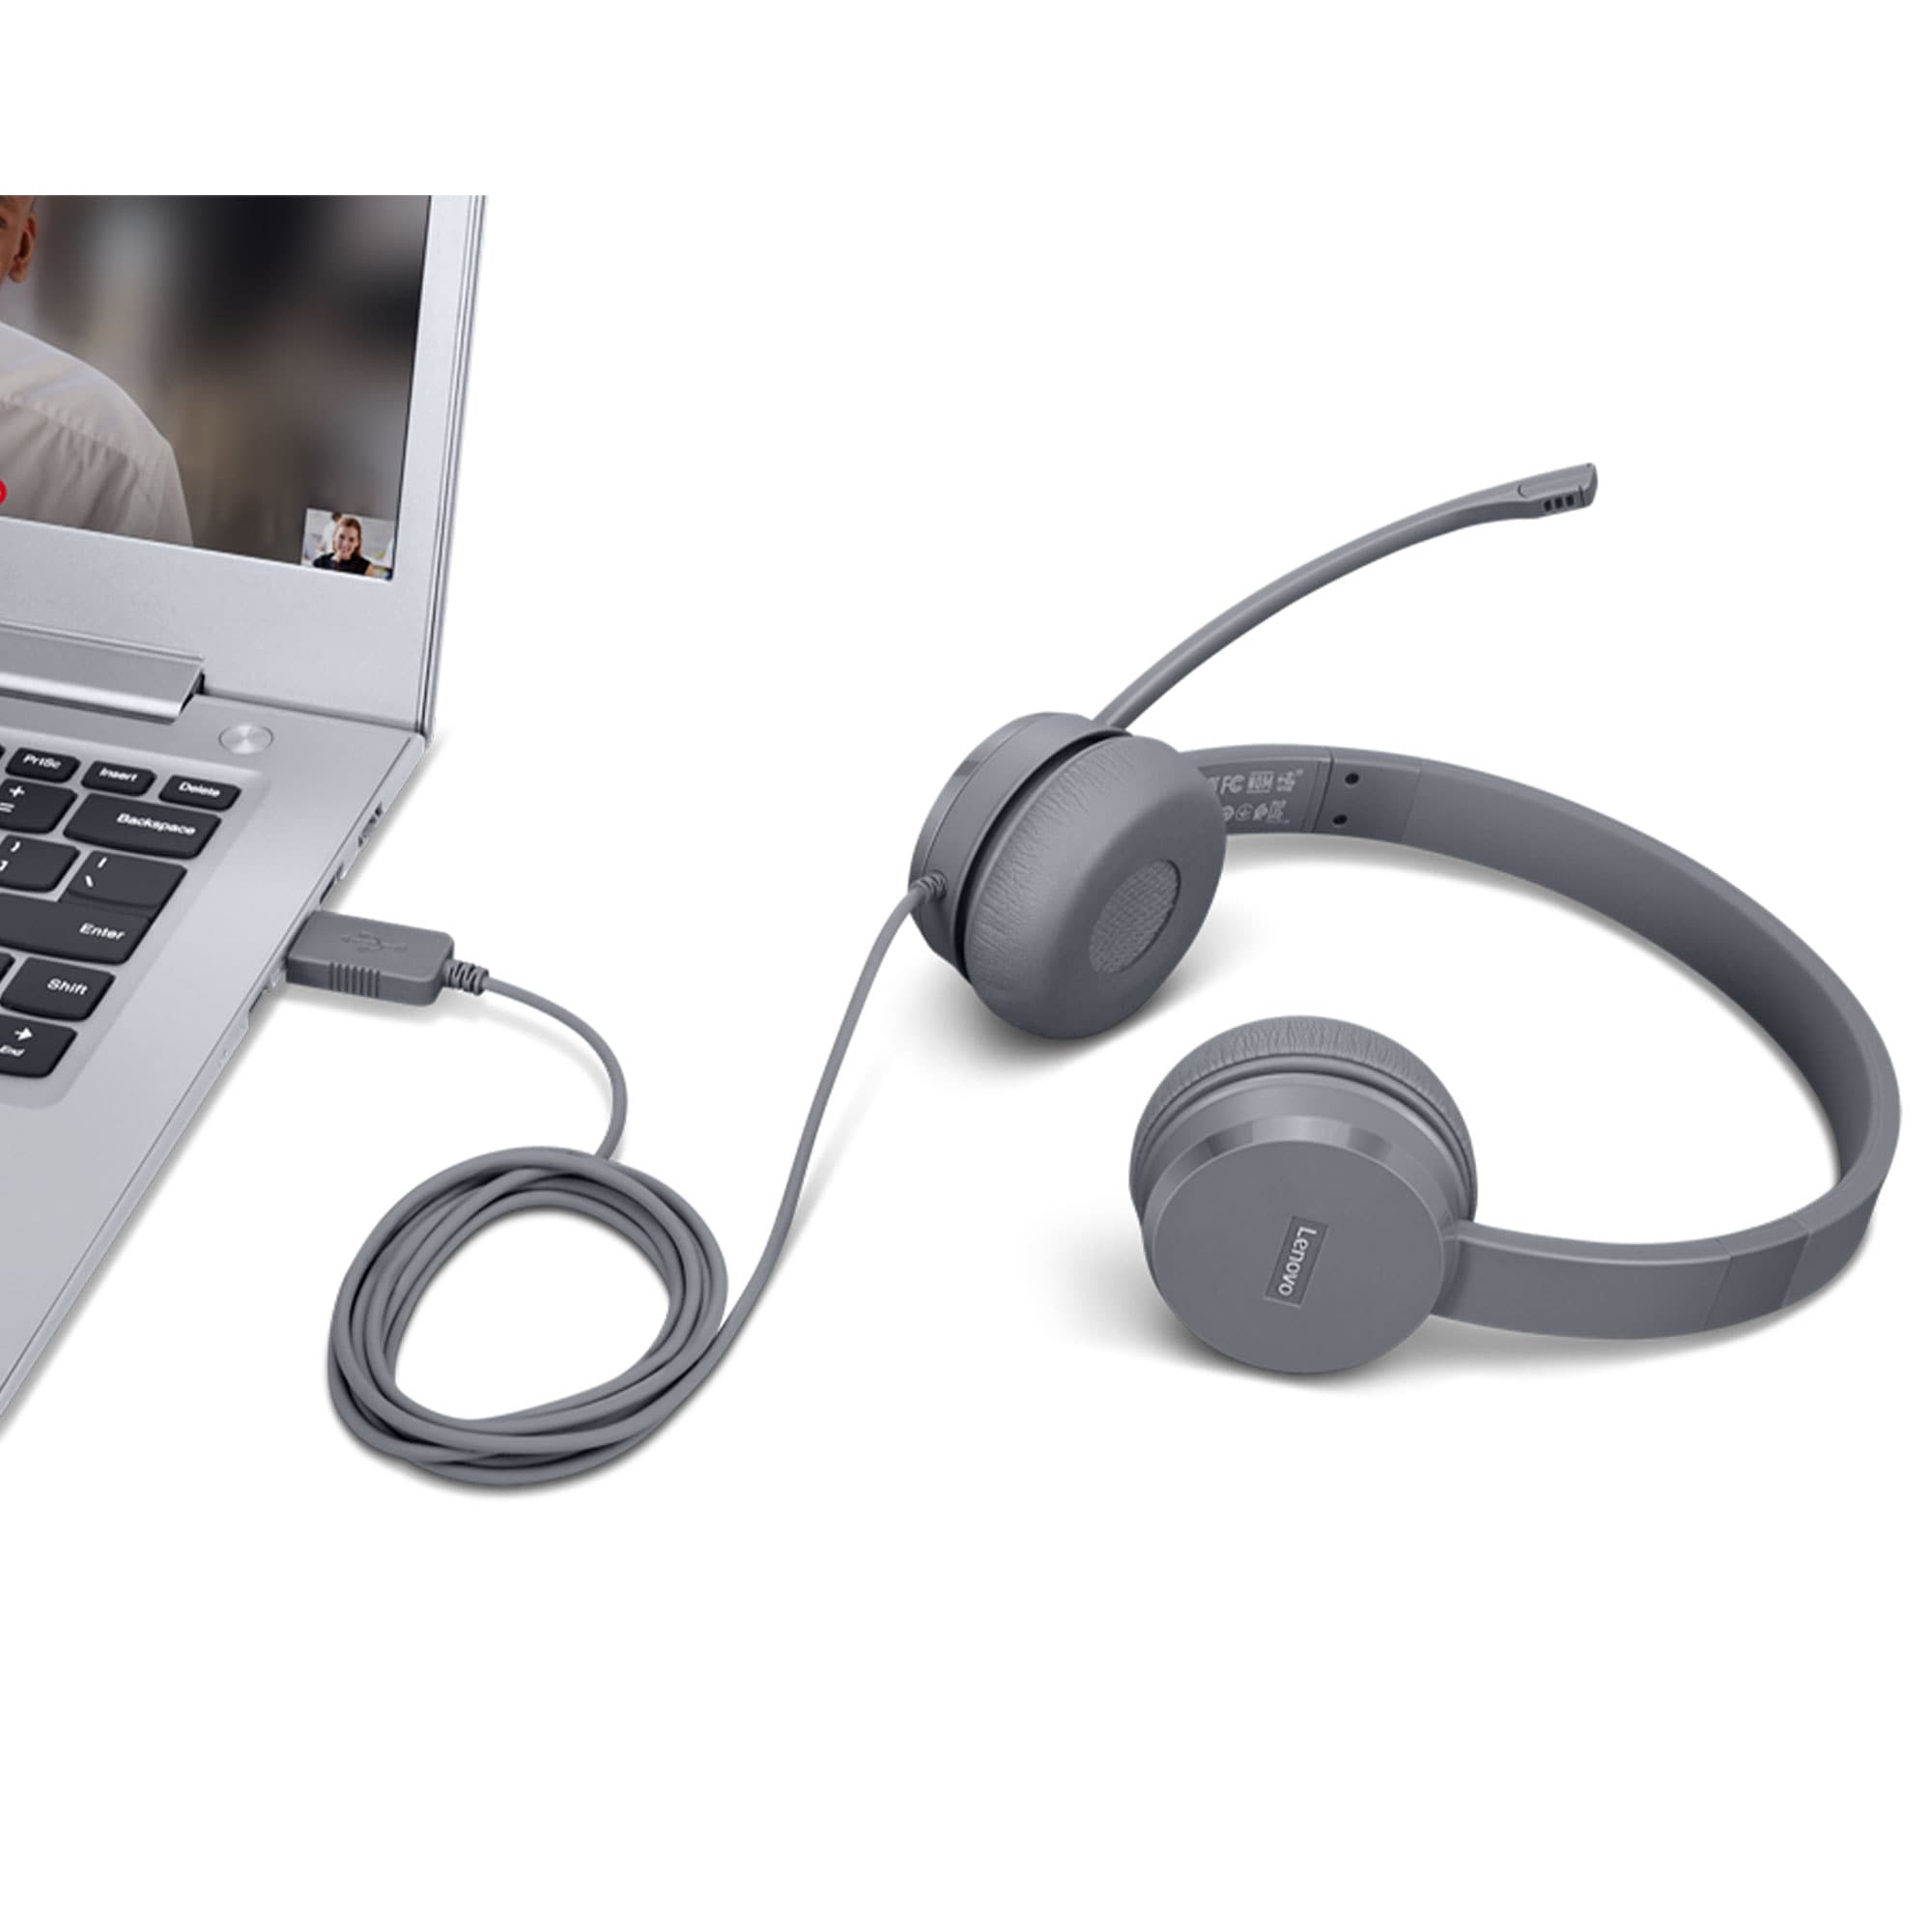 Lenovo Select USB Wired Stereo Headset - image 5 of 5